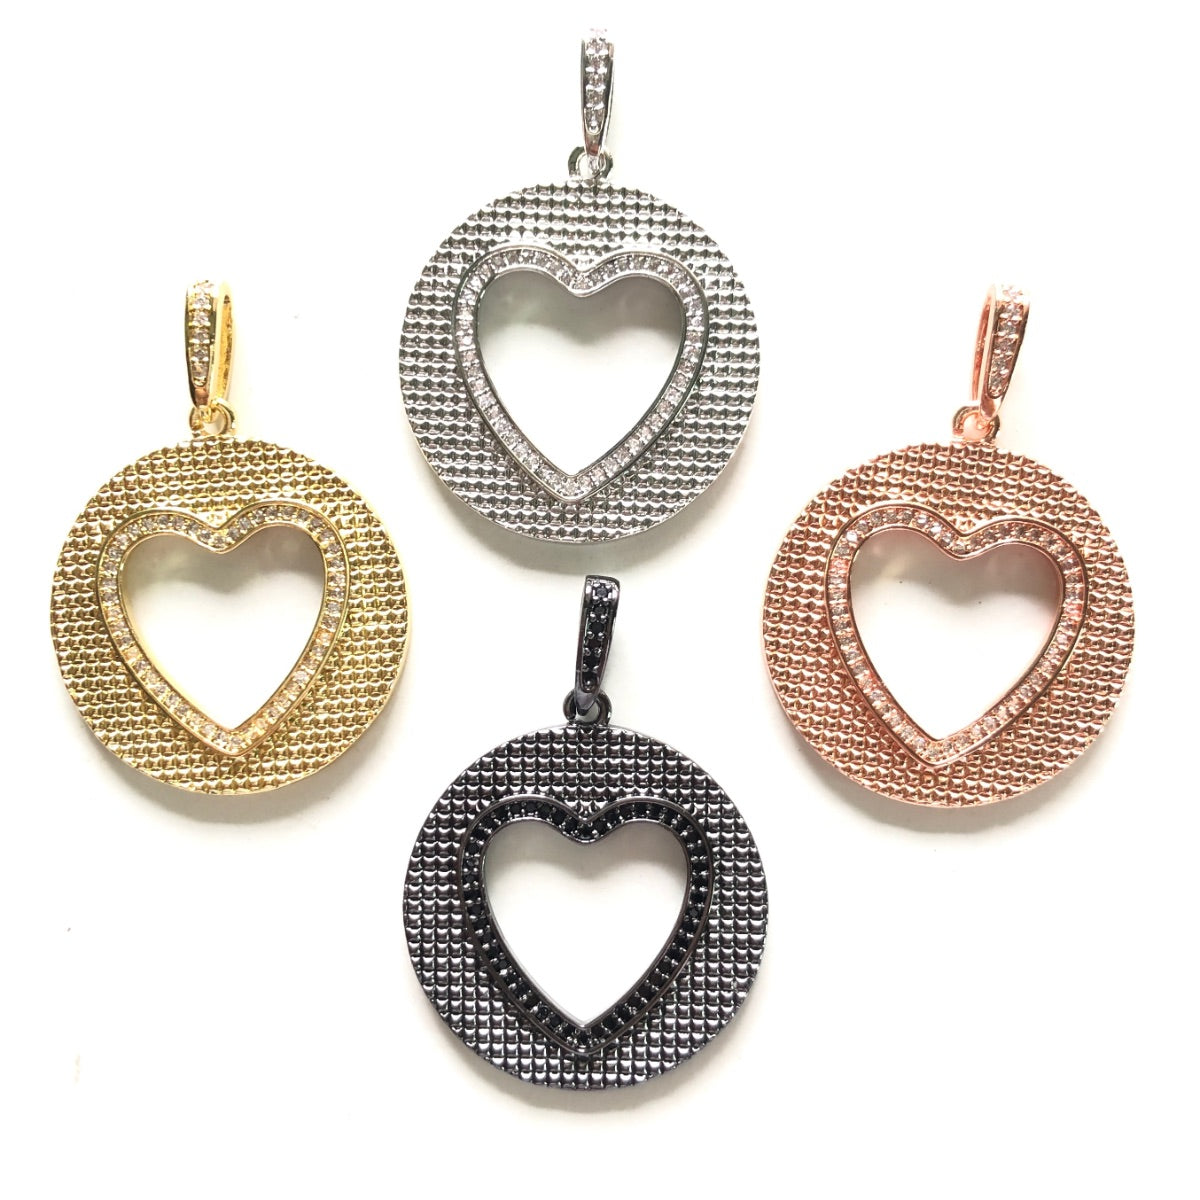 10pcs/lot 40*28.3mm CZ Pave Round Hollow Heart Charms CZ Paved Charms Discs Hearts On Sale Charms Beads Beyond